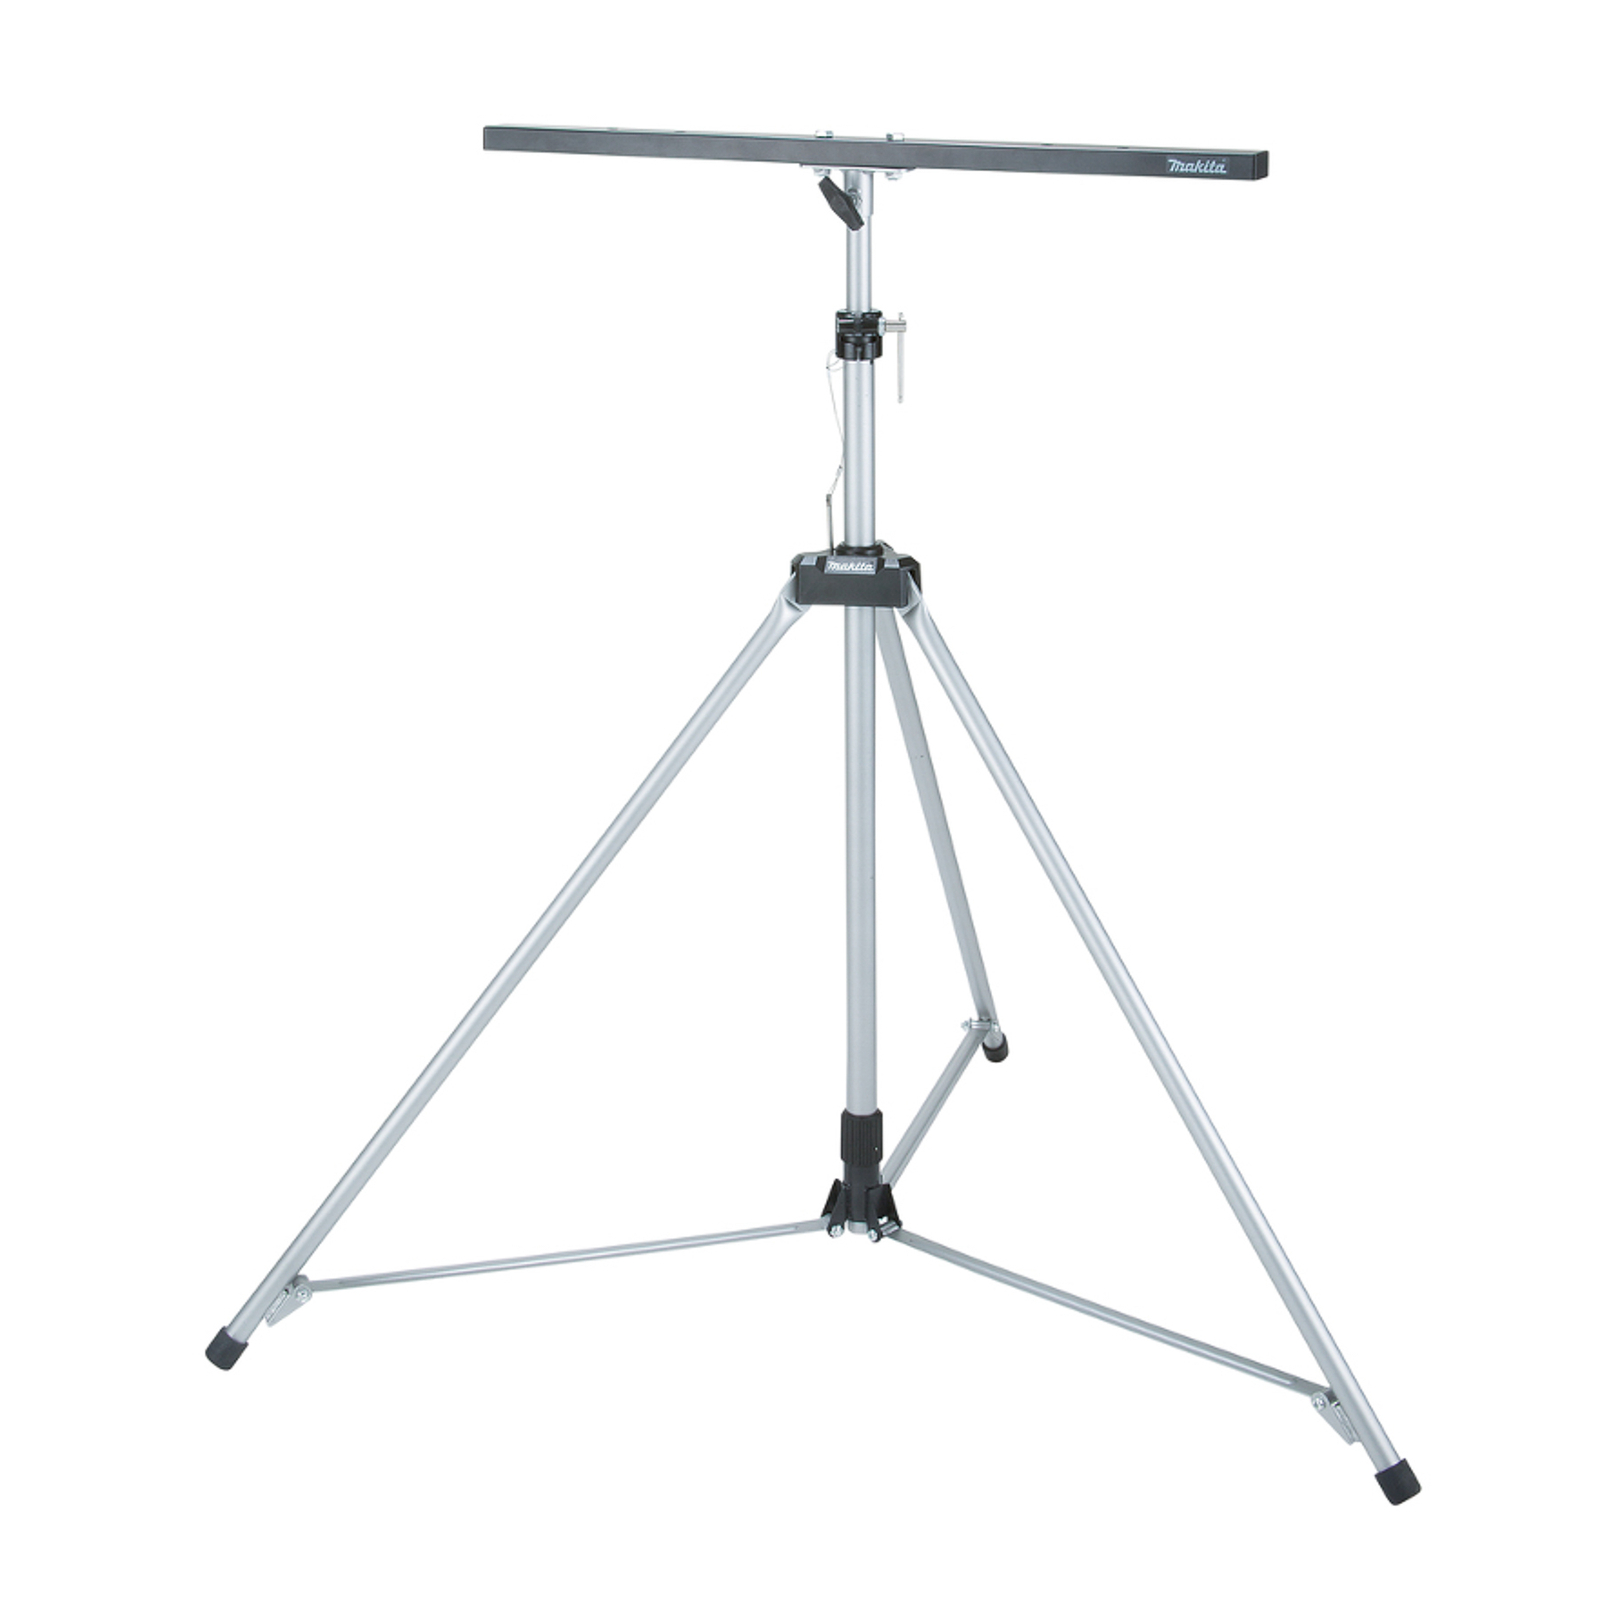 Makita tripod stand for two floodlights